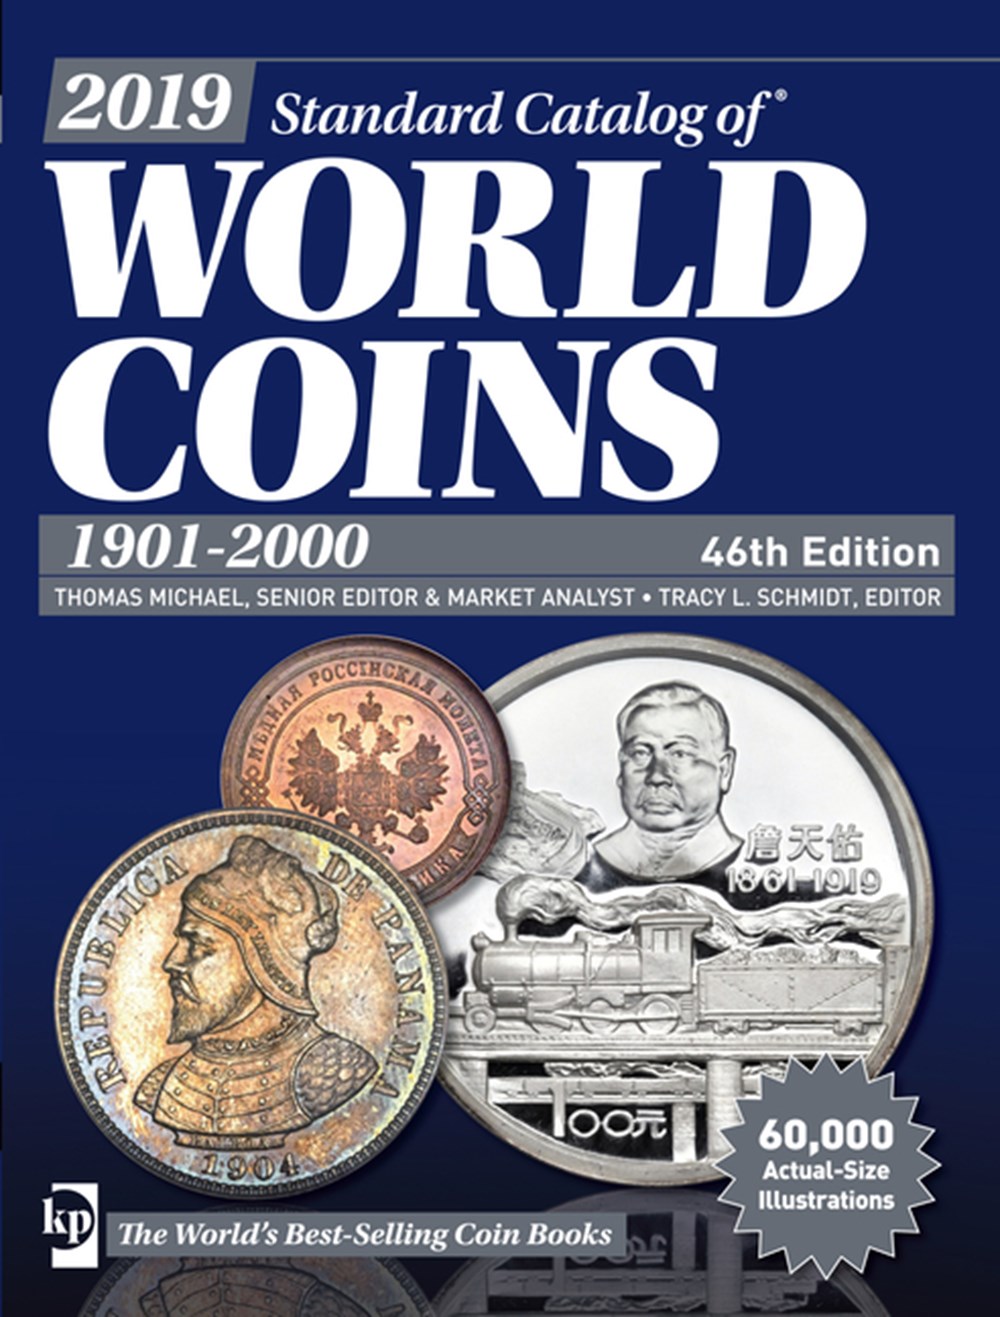 2019 Standard Catalog of World Coins, 1901-2000 (Forty-Sixth)